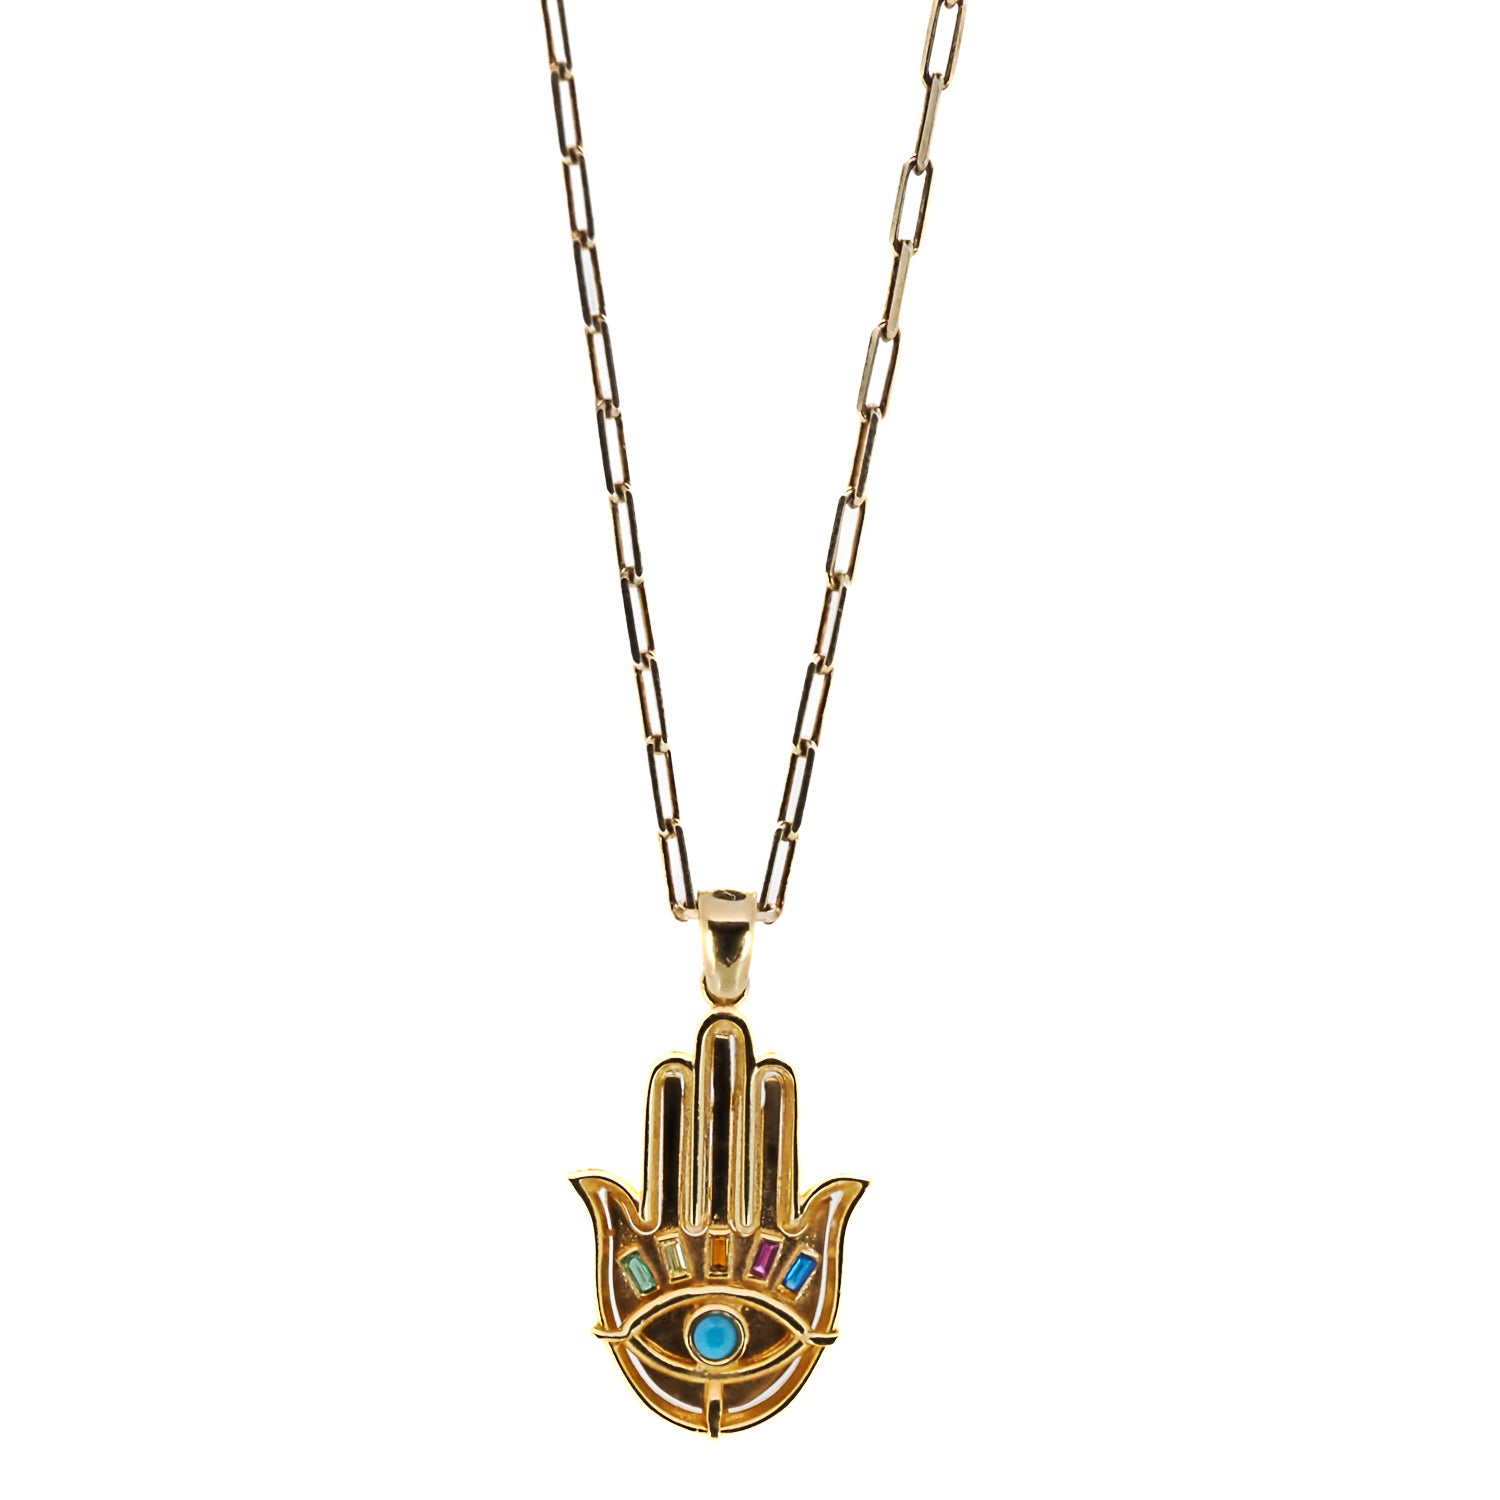 Hamsa Talisman Gold Necklace - A stunning necklace featuring a gold-plated Hamsa pendant adorned with a turquoise stone and sparkling zircon stones.